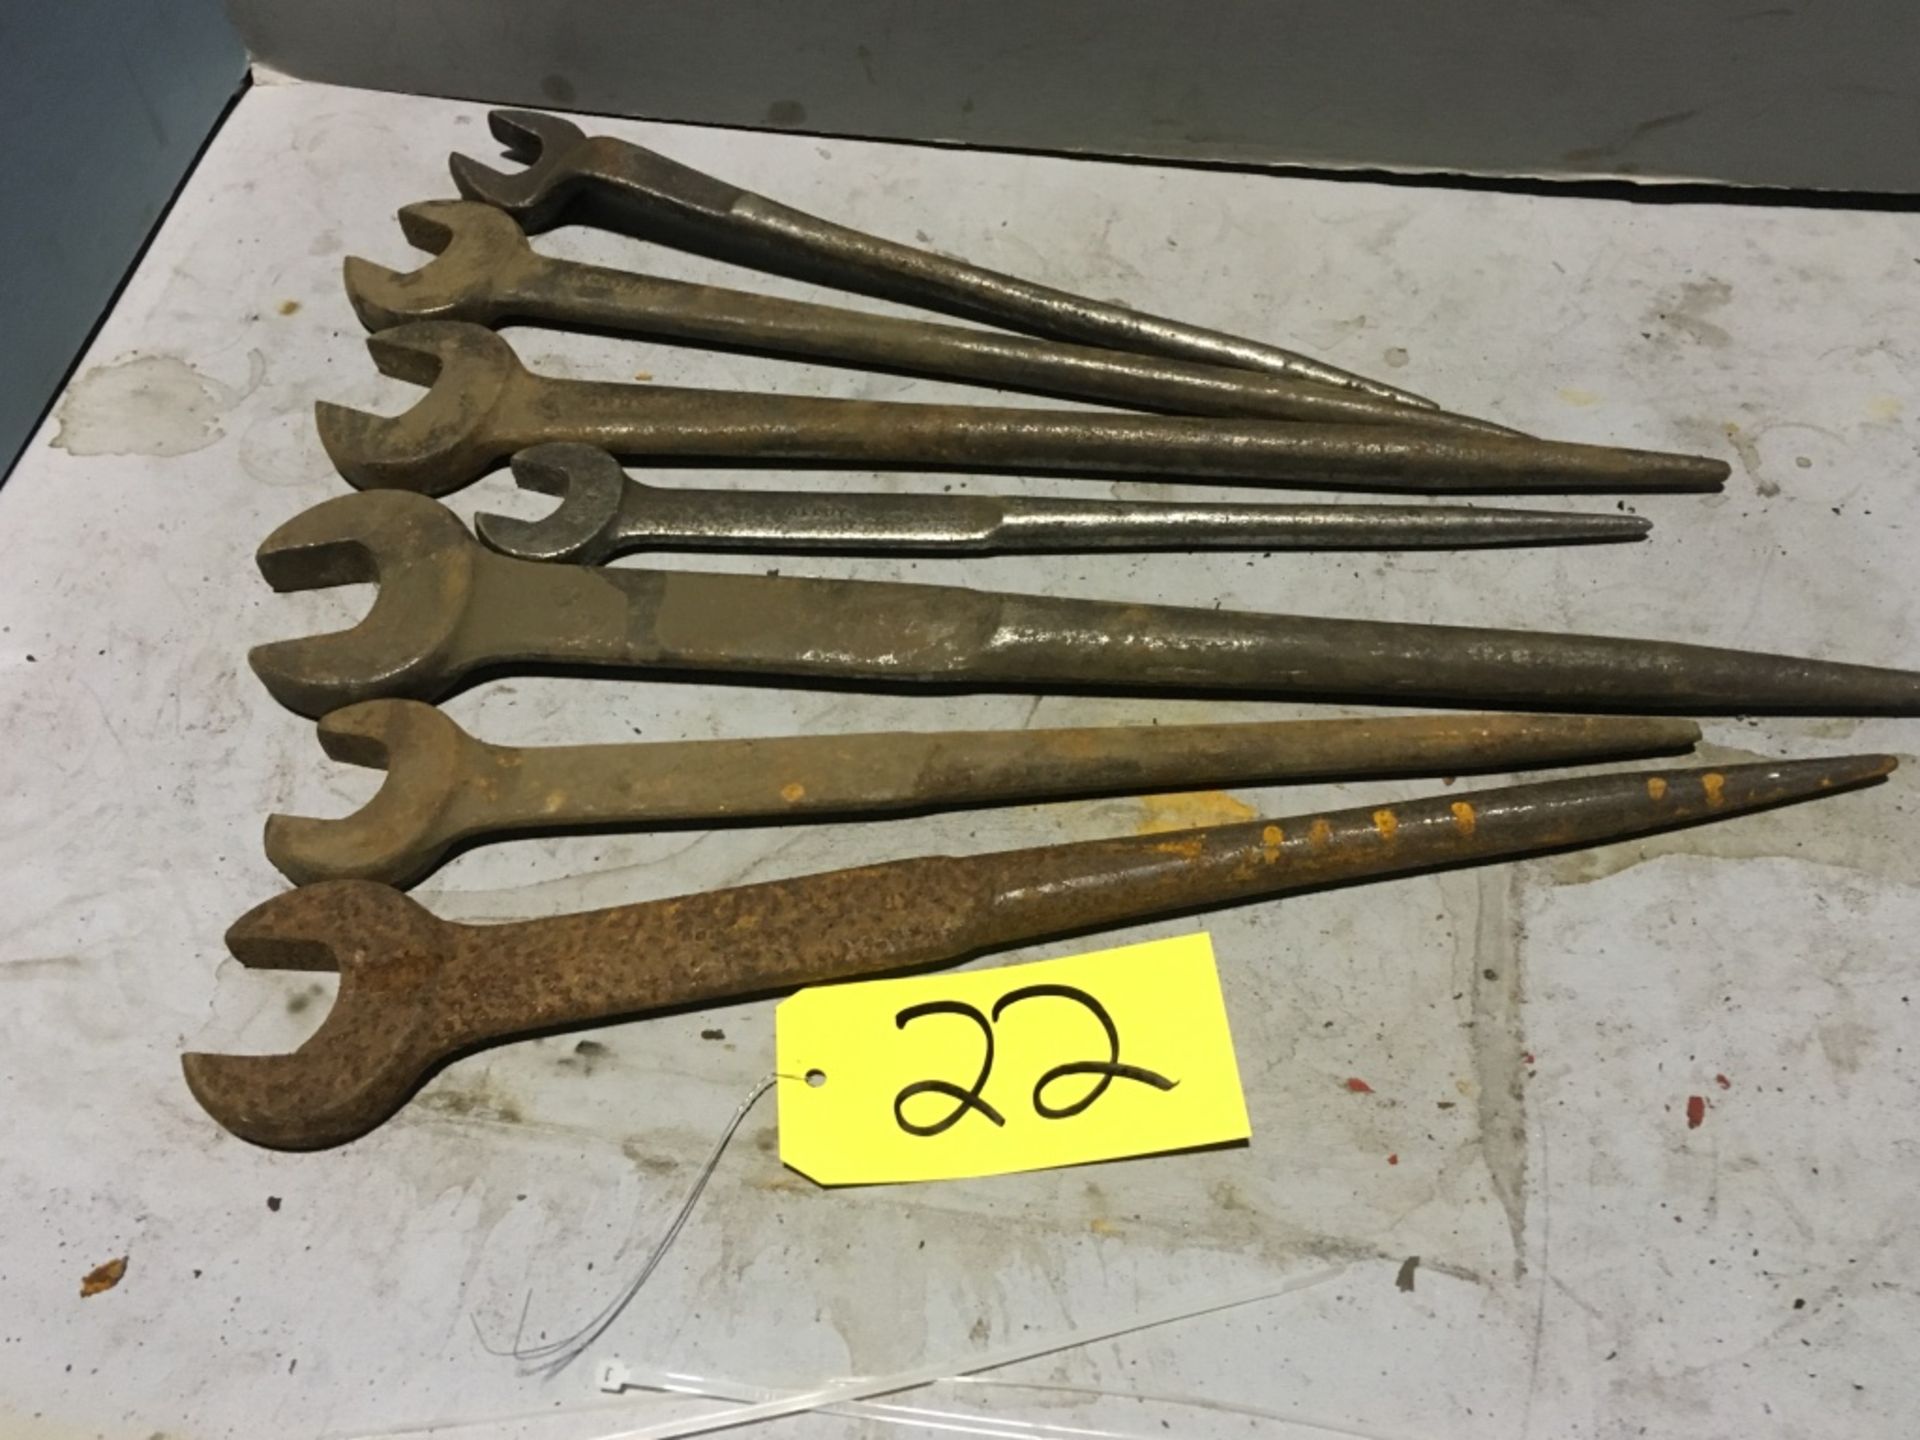 Approximately (11), assortment of fit-up open end wrenches, various sizes and lengths.